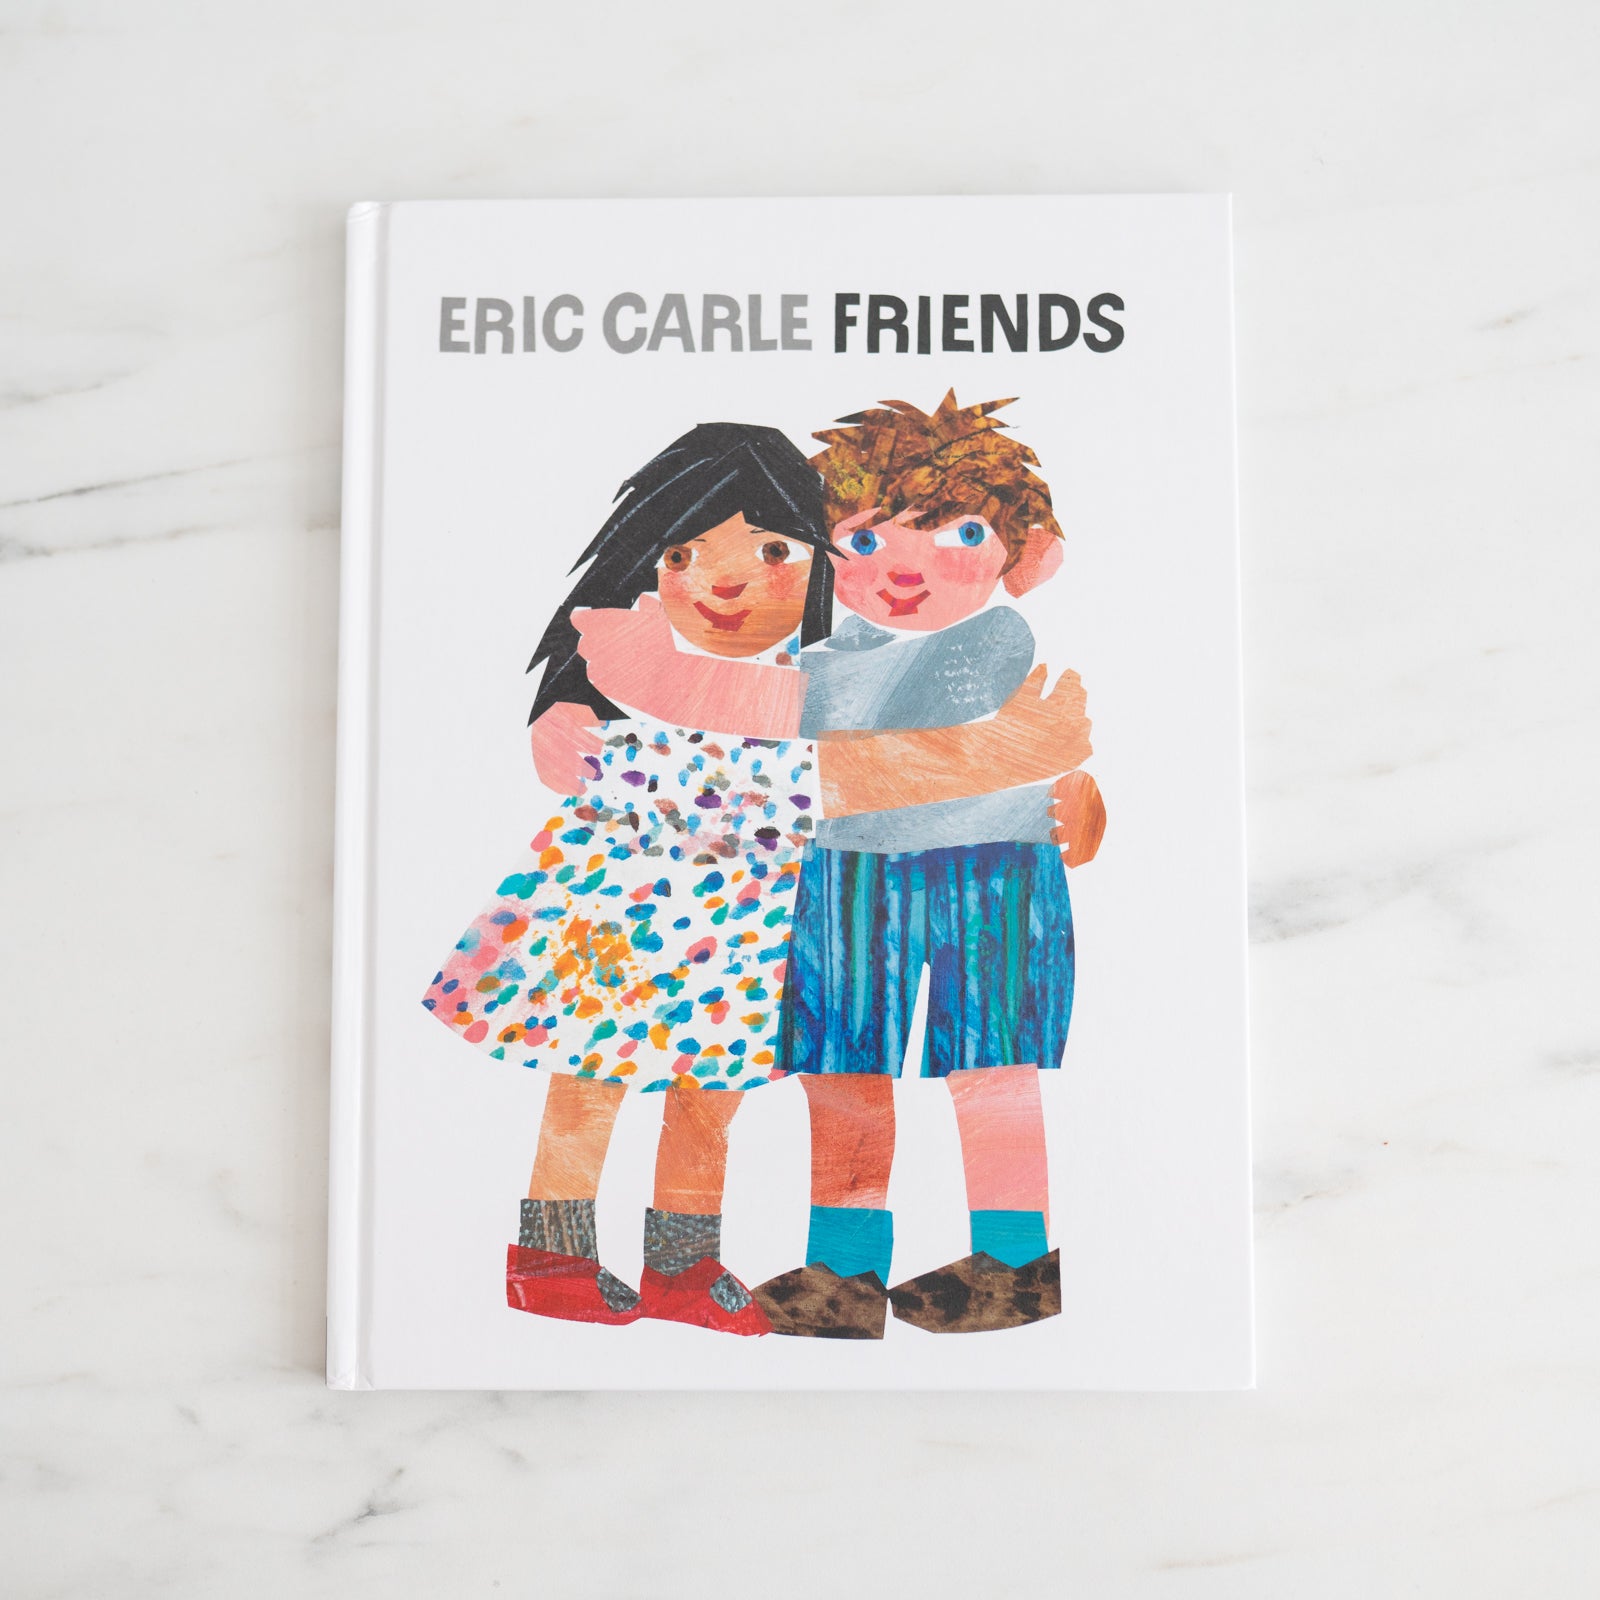 "Friends" by Eric Carle